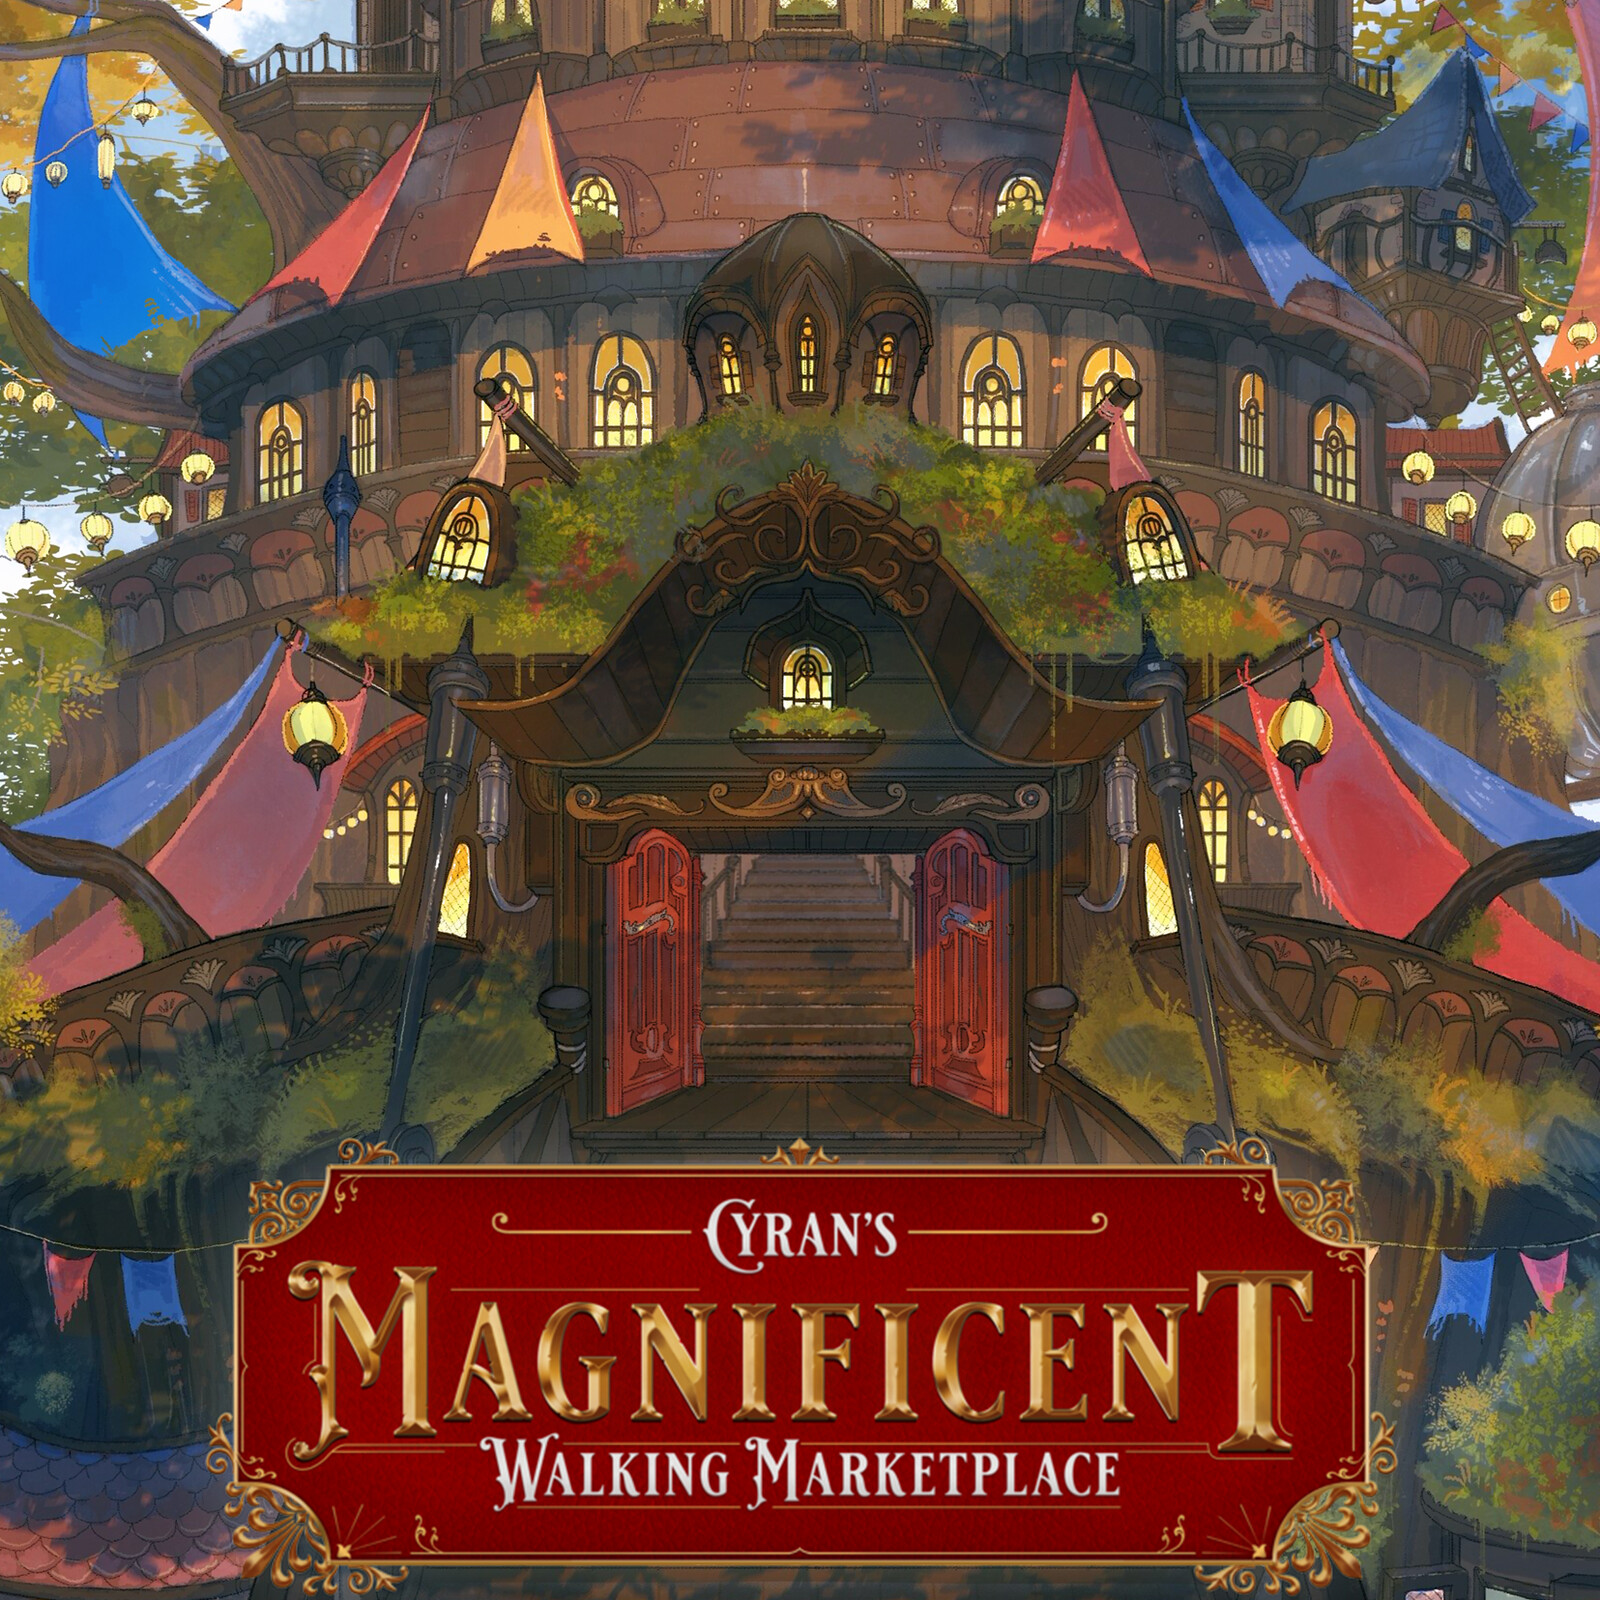 The Market Canopy「Cyran's Magnificent Walking Marketplace」